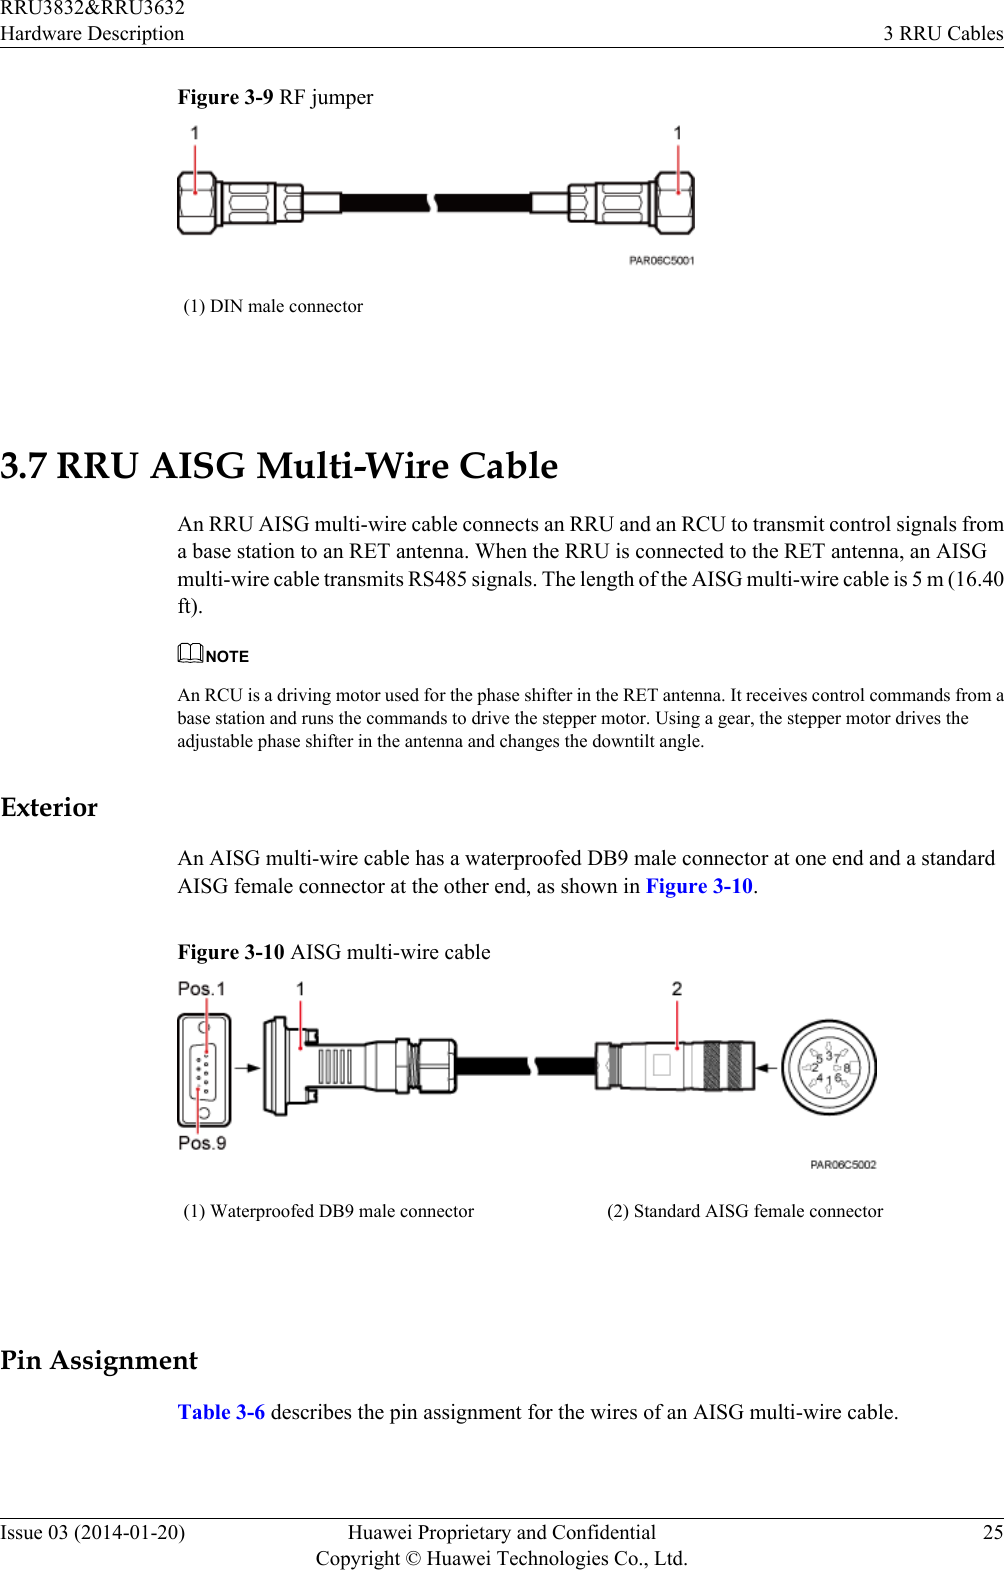 Figure 3-9 RF jumper(1) DIN male connector 3.7 RRU AISG Multi-Wire CableAn RRU AISG multi-wire cable connects an RRU and an RCU to transmit control signals froma base station to an RET antenna. When the RRU is connected to the RET antenna, an AISGmulti-wire cable transmits RS485 signals. The length of the AISG multi-wire cable is 5 m (16.40ft).NOTEAn RCU is a driving motor used for the phase shifter in the RET antenna. It receives control commands from abase station and runs the commands to drive the stepper motor. Using a gear, the stepper motor drives theadjustable phase shifter in the antenna and changes the downtilt angle.ExteriorAn AISG multi-wire cable has a waterproofed DB9 male connector at one end and a standardAISG female connector at the other end, as shown in Figure 3-10.Figure 3-10 AISG multi-wire cable(1) Waterproofed DB9 male connector (2) Standard AISG female connector Pin AssignmentTable 3-6 describes the pin assignment for the wires of an AISG multi-wire cable.RRU3832&amp;RRU3632Hardware Description 3 RRU CablesIssue 03 (2014-01-20) Huawei Proprietary and ConfidentialCopyright © Huawei Technologies Co., Ltd.25